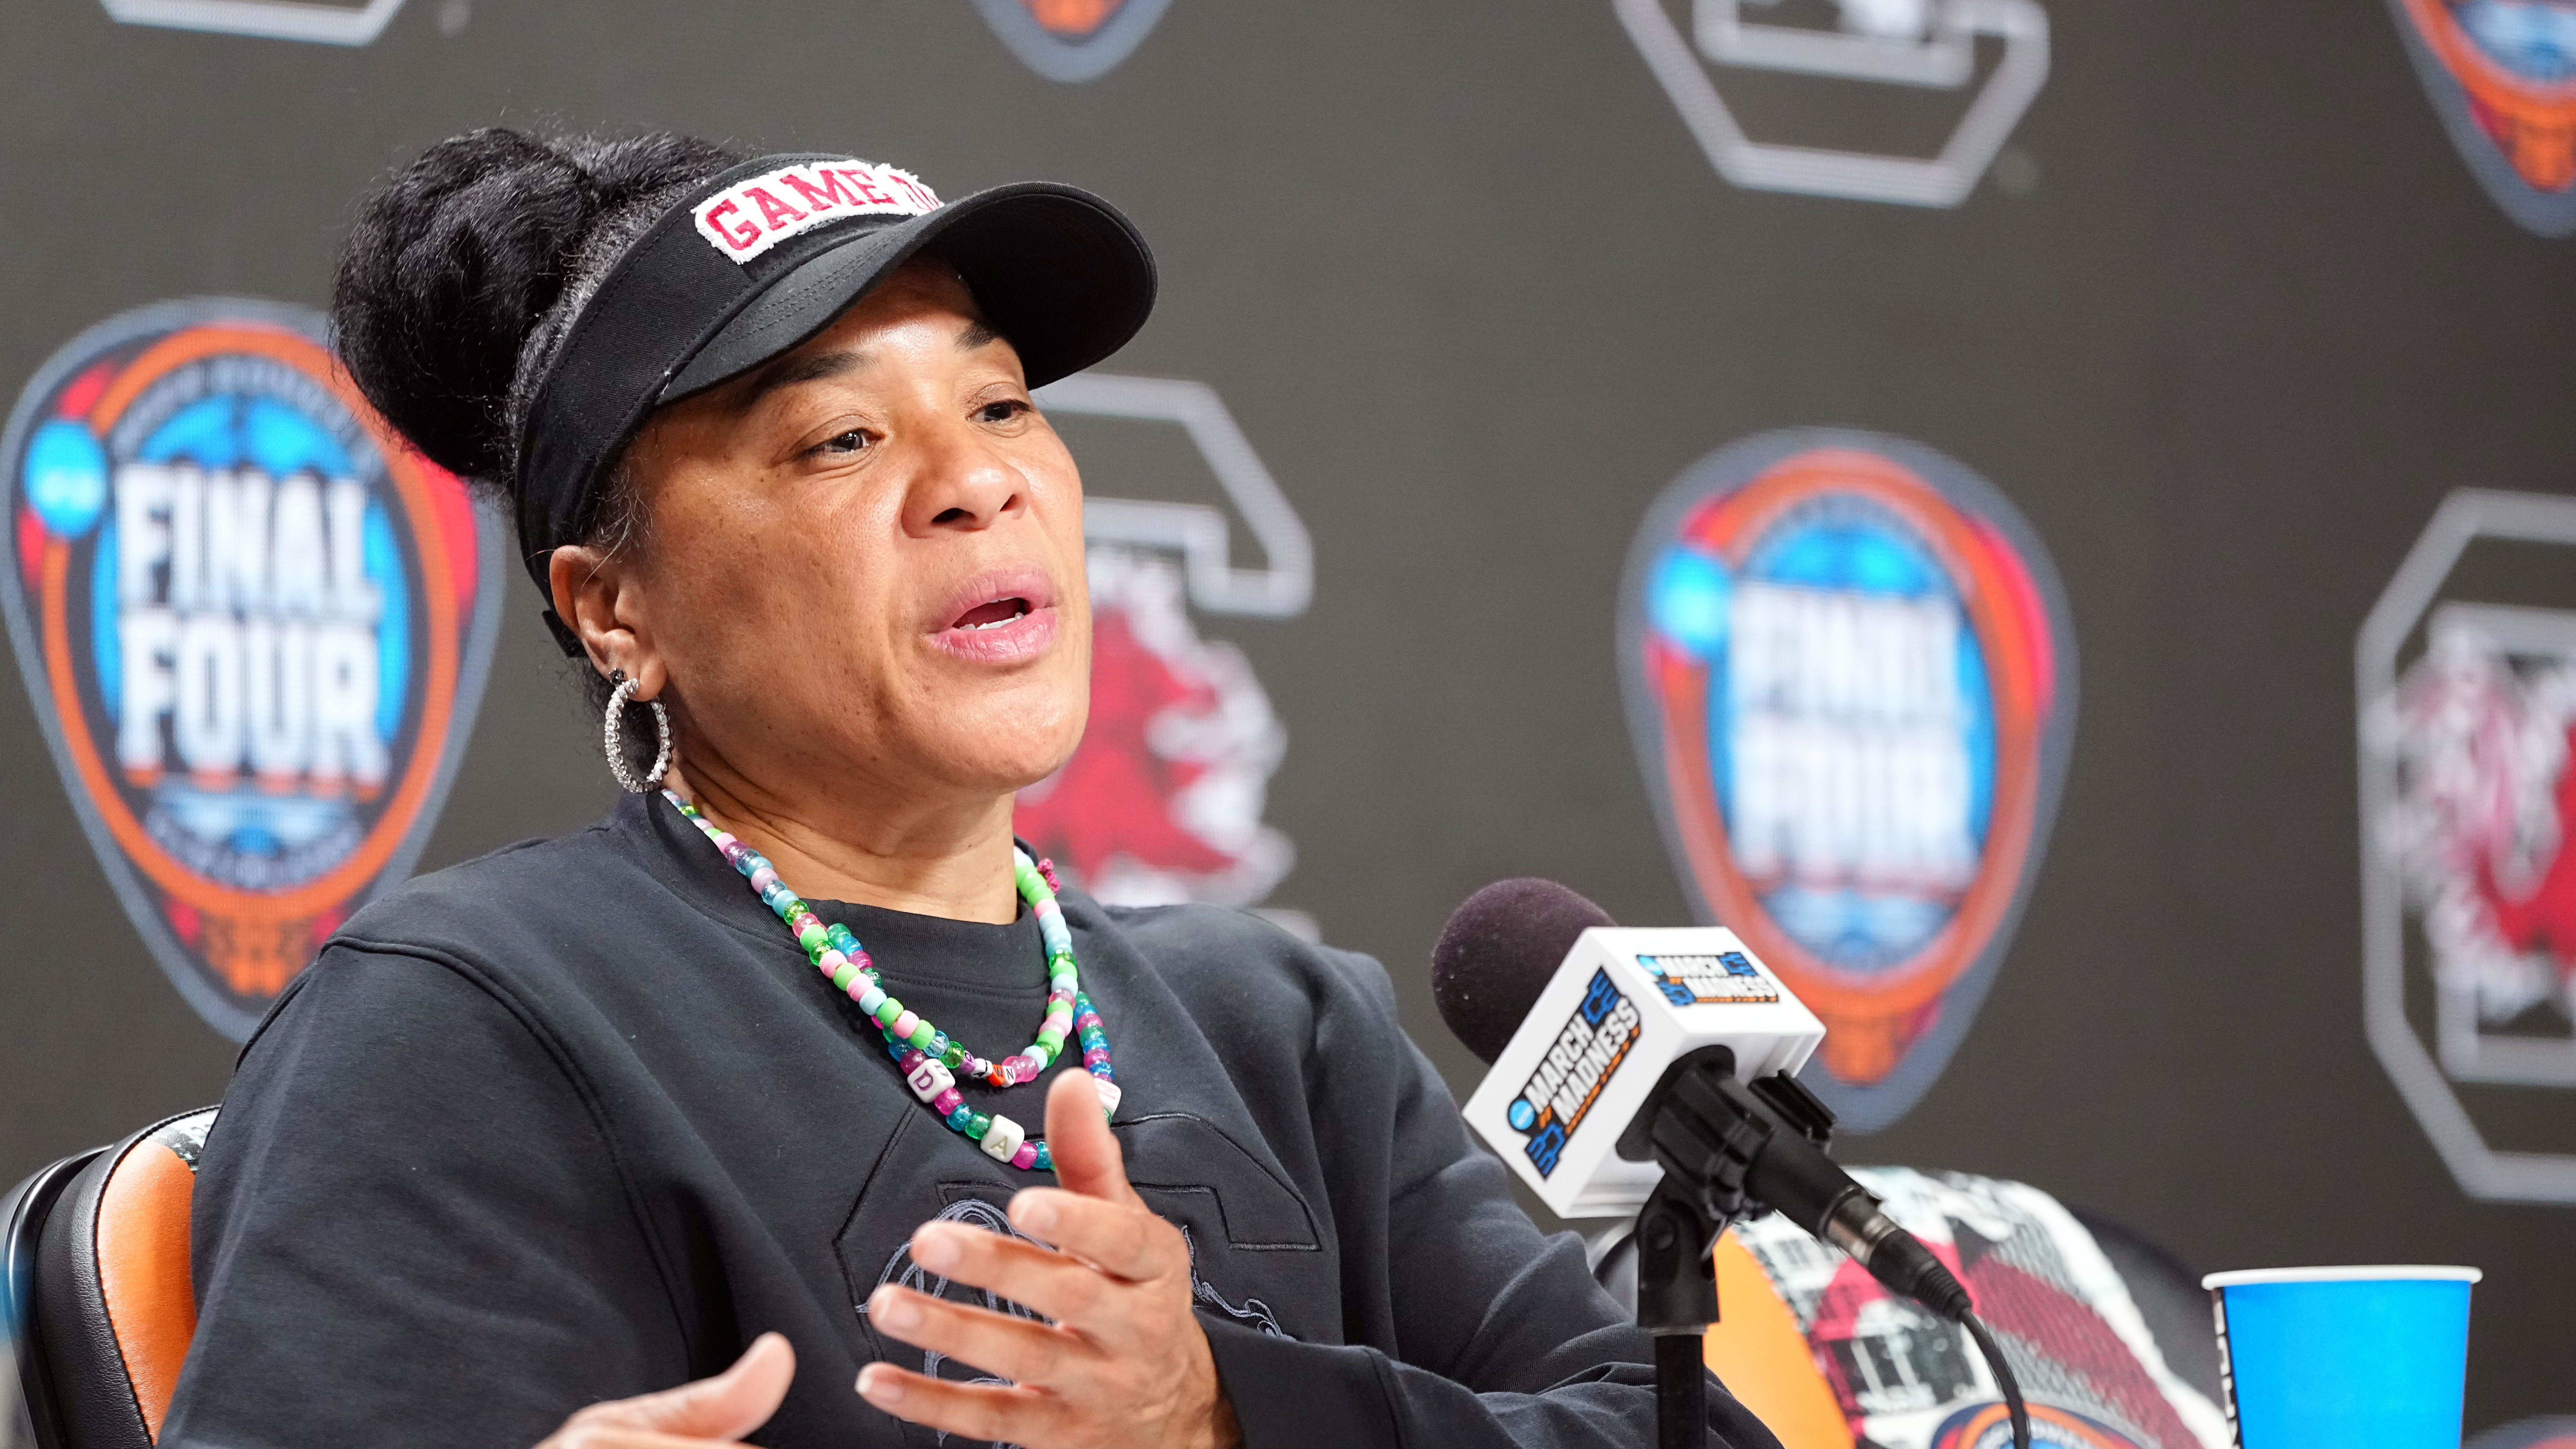 South Carolina Gamecocks head coach Dawn Staley speaks to the media on the eve of the NCAA tournament championship game.